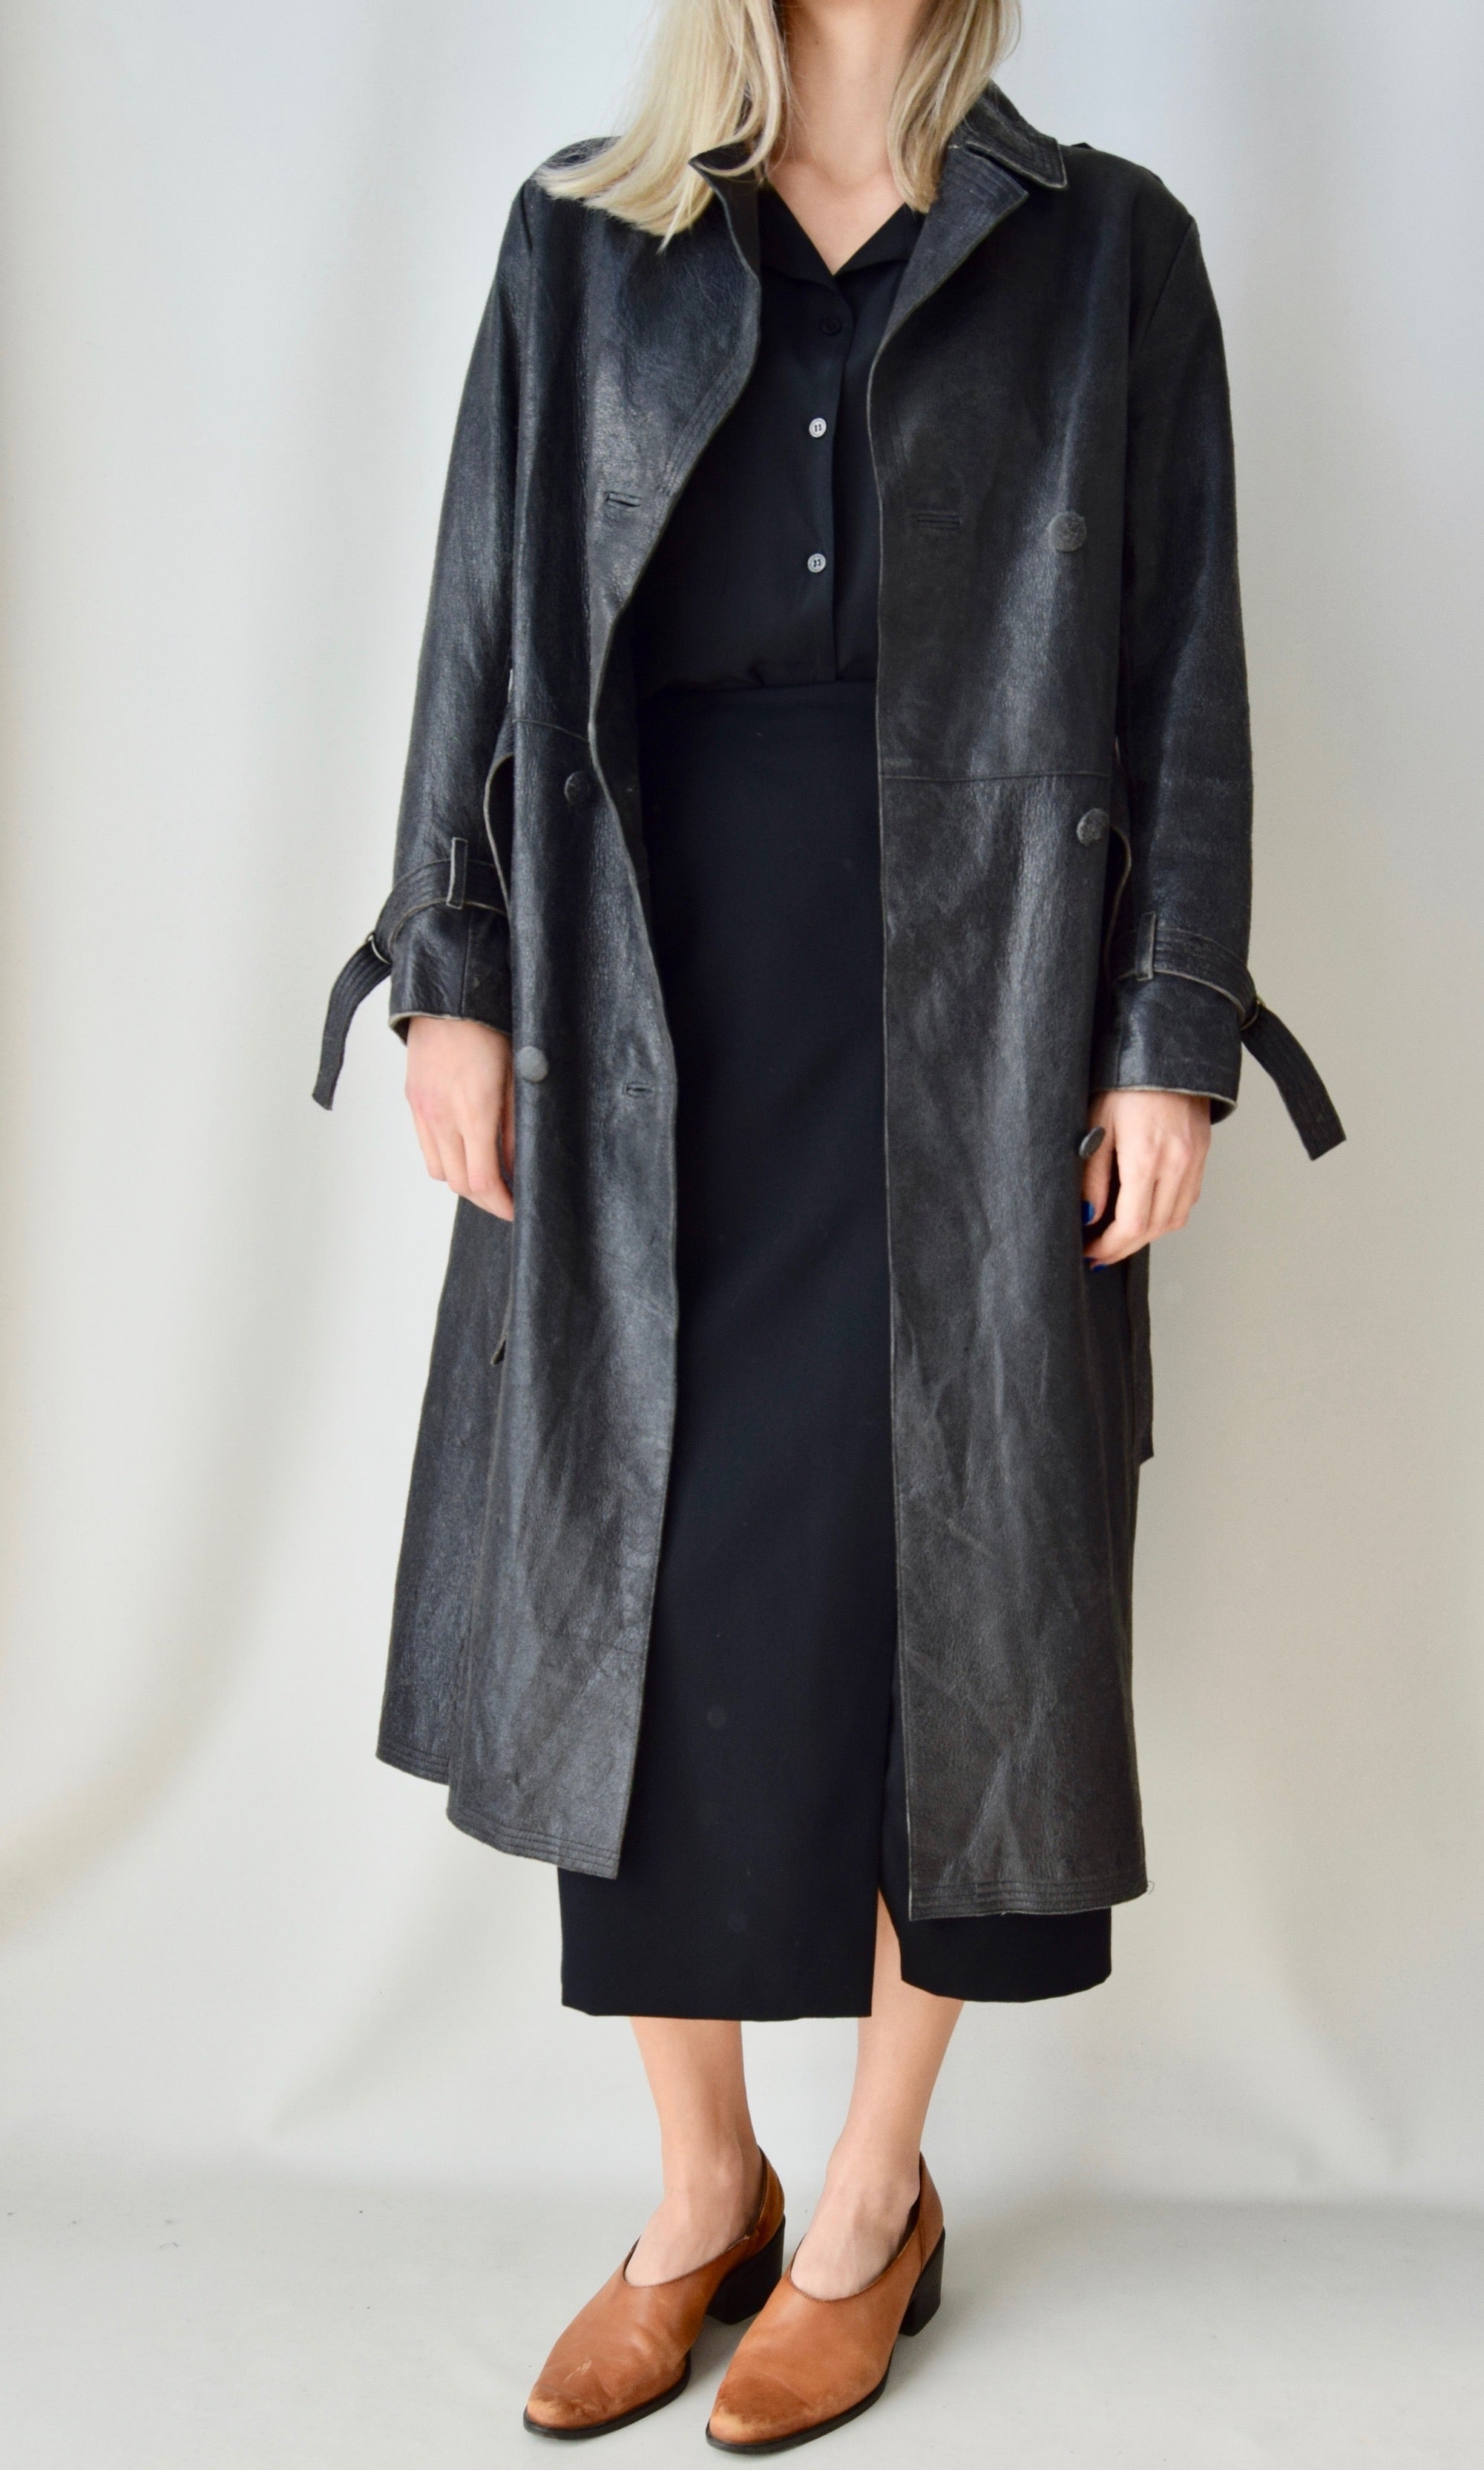 Distressed Effect Leather Trench